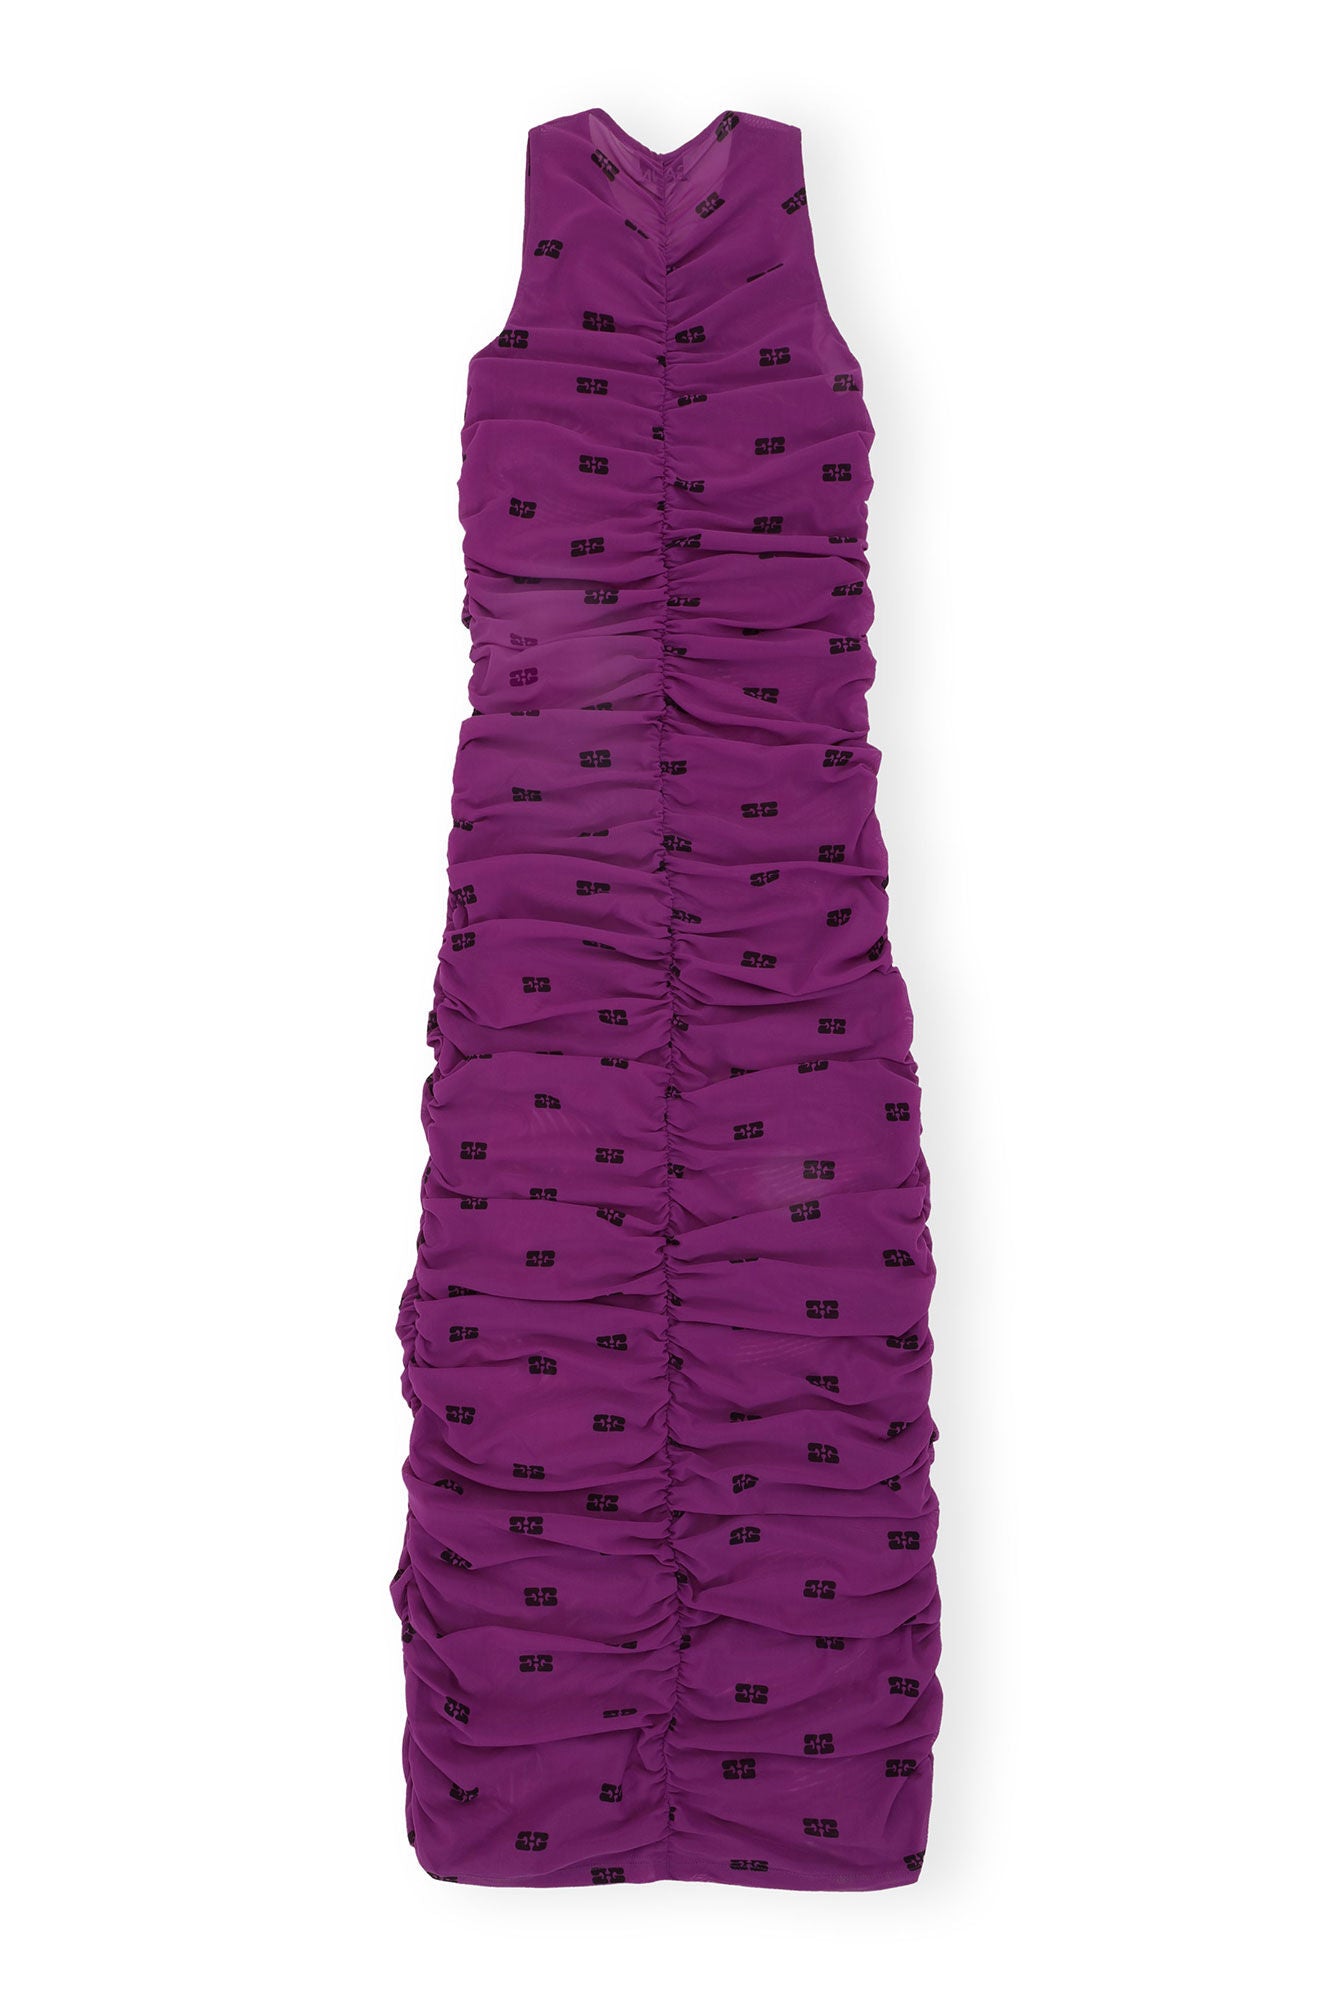 Ruched Sleeveless Dress in Sparkling Grape Mesh